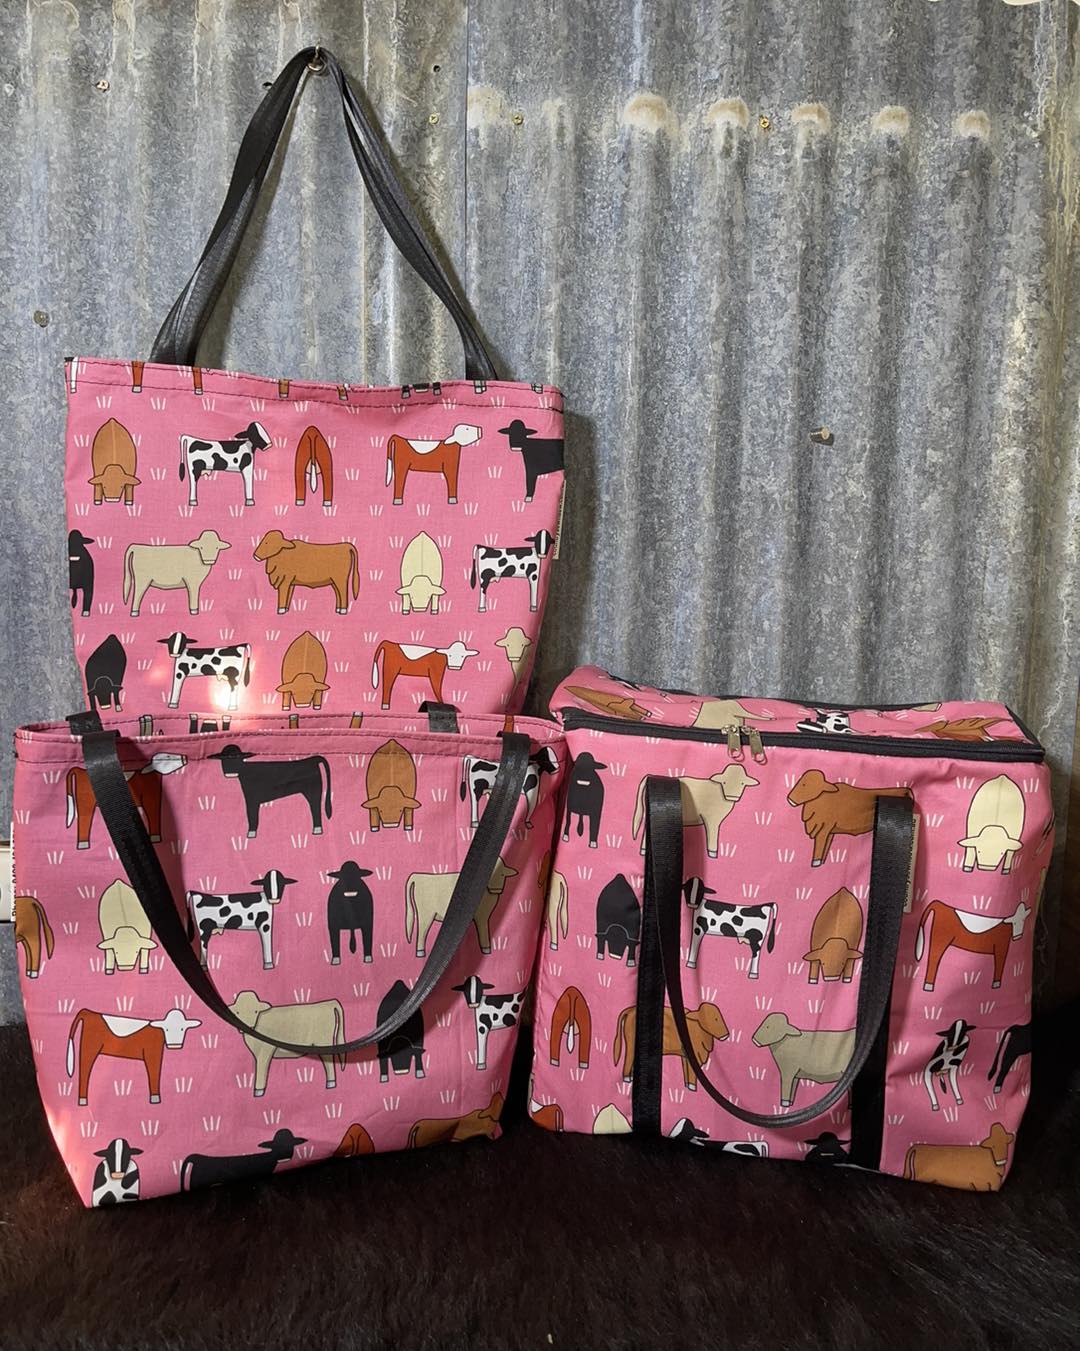 Ready made Shopping Bag Set (insulated cooler bag) - Pink Cows